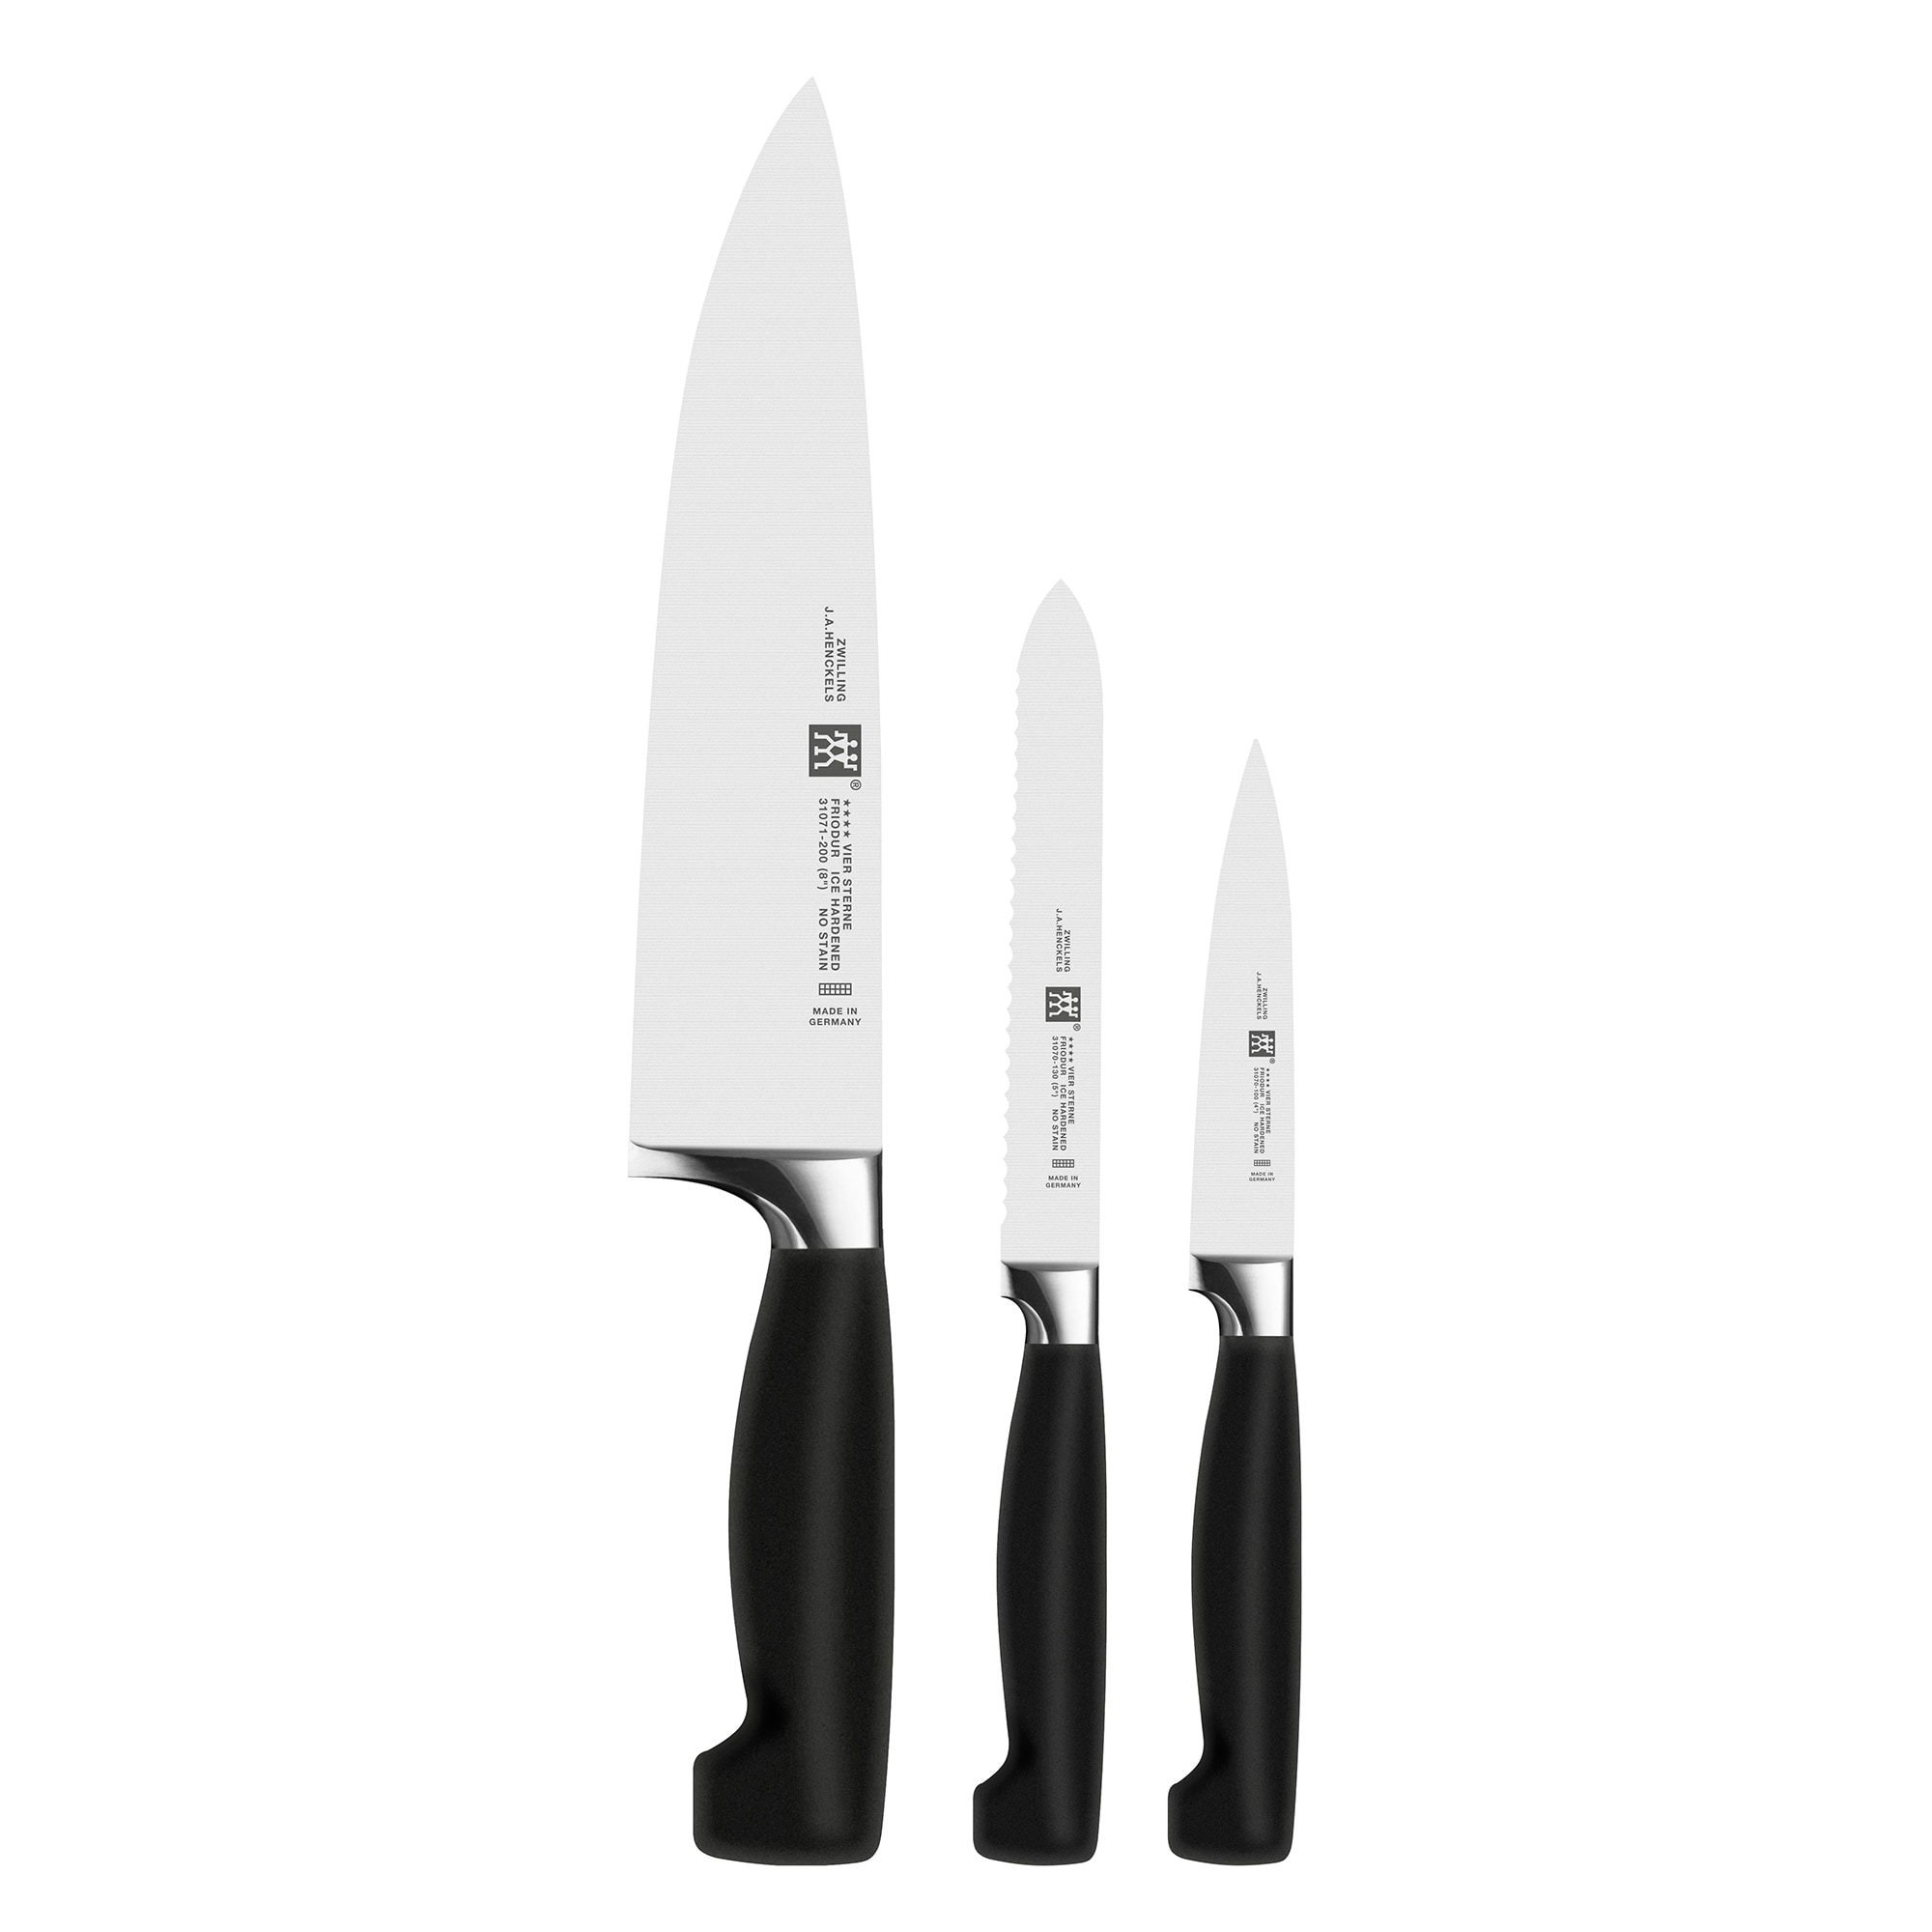 Zwilling J.A. Henckels Four Star 4 inch Paring Knife, 31070-100 - *New